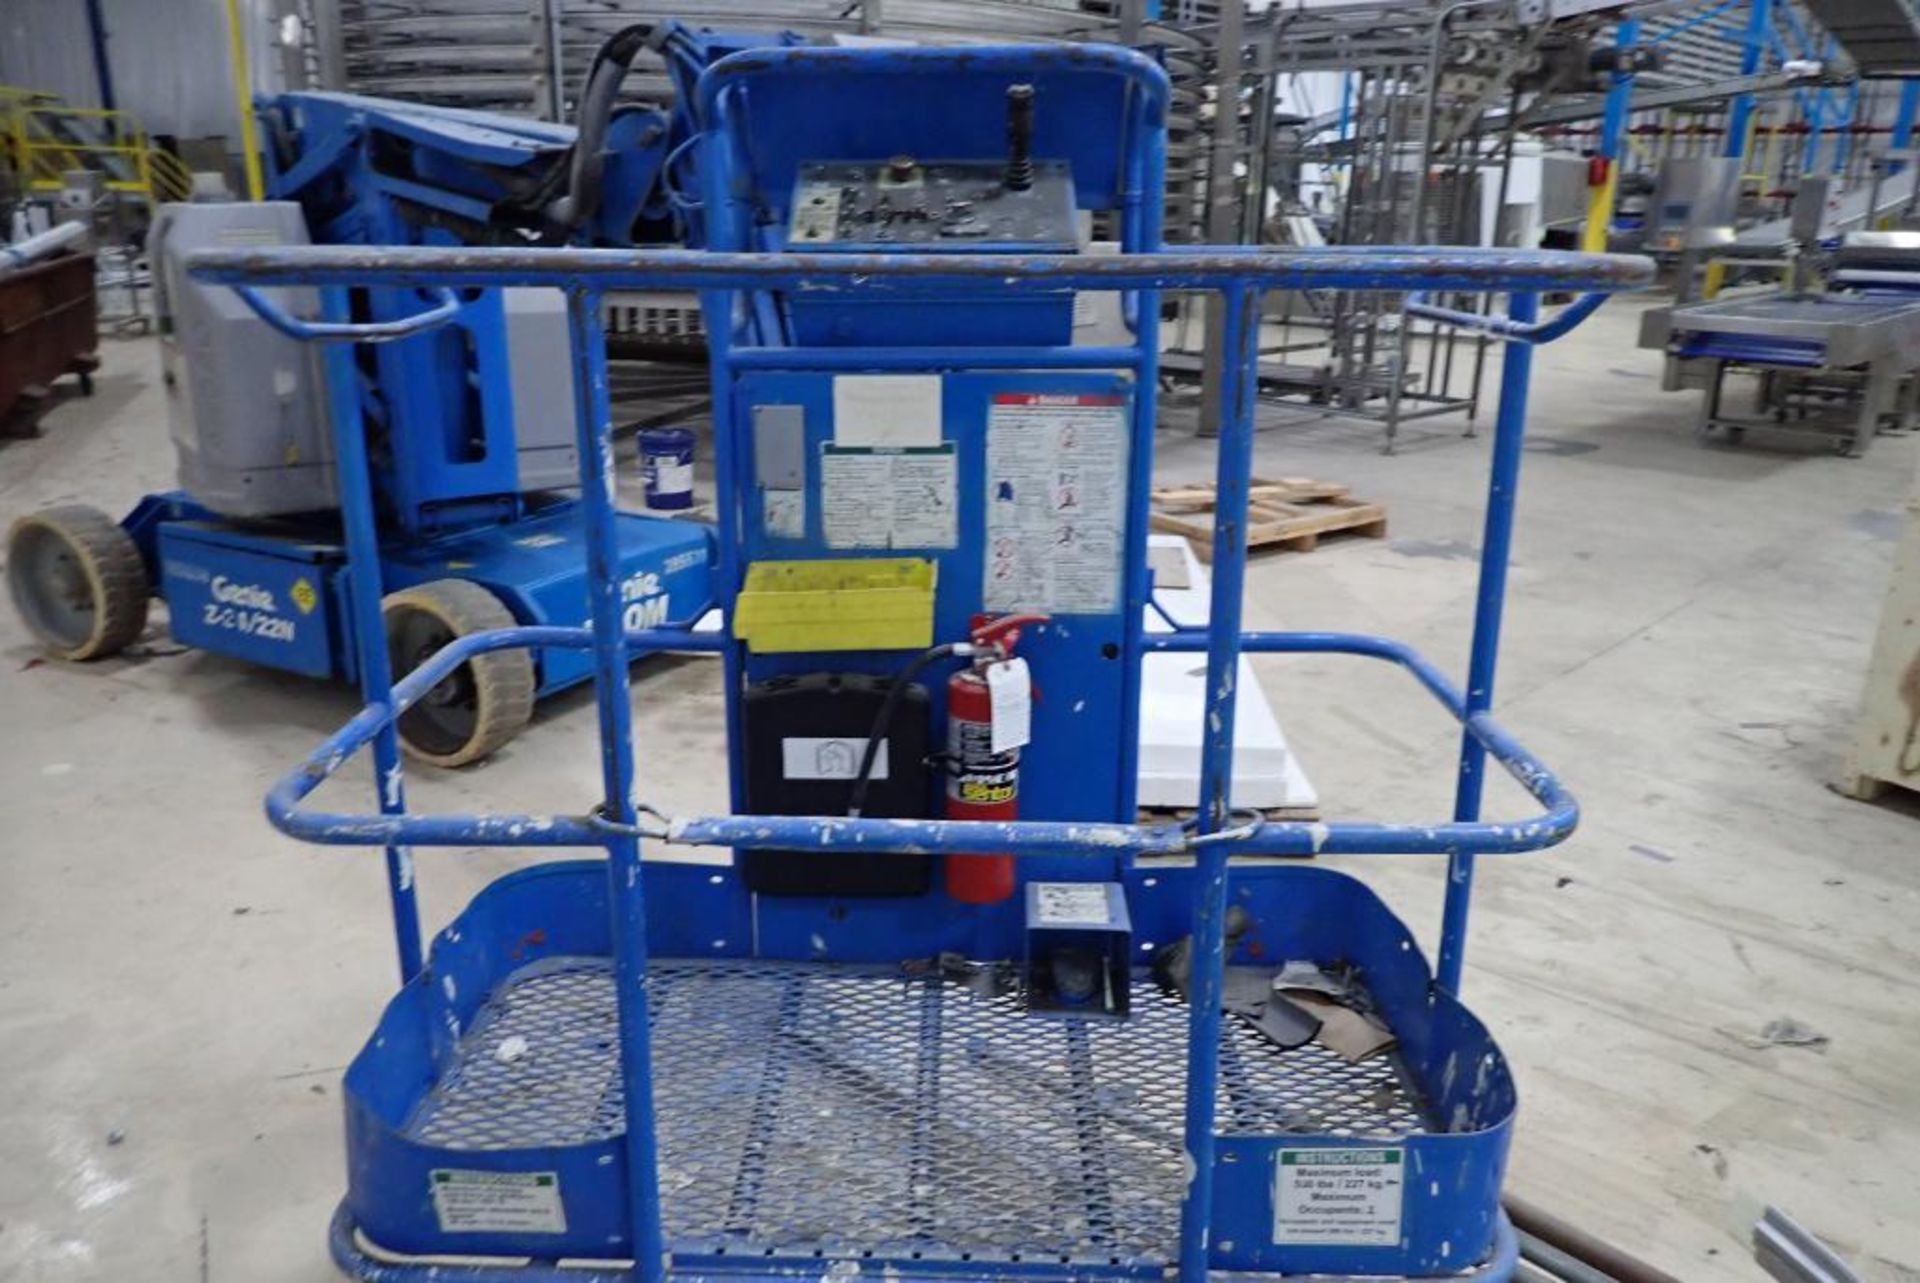 2002 Genie electric boom lift - Image 14 of 20